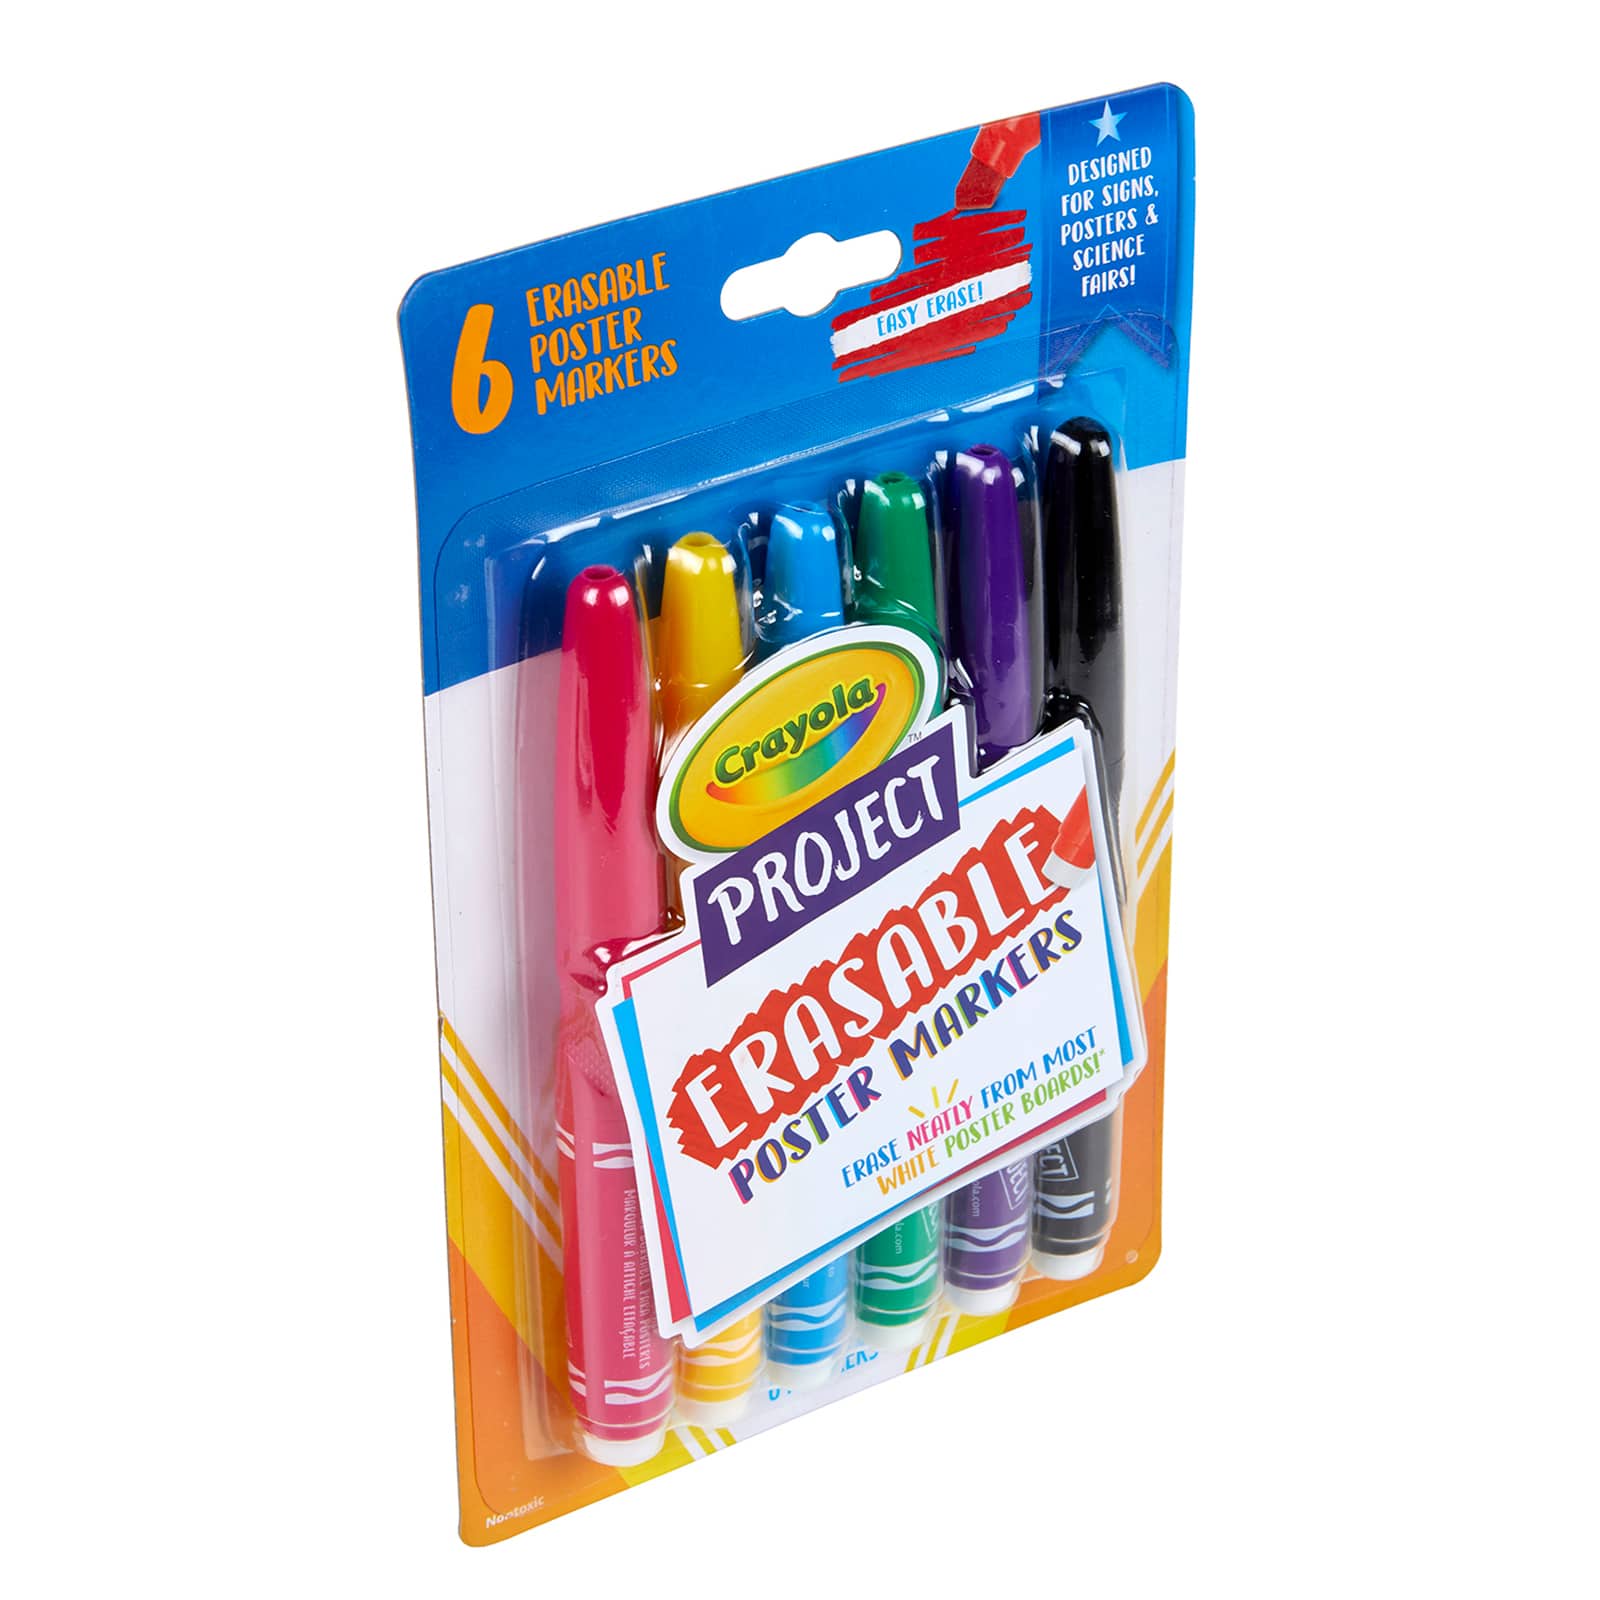 Crayola&#xAE; Project Erasable Poster Markers